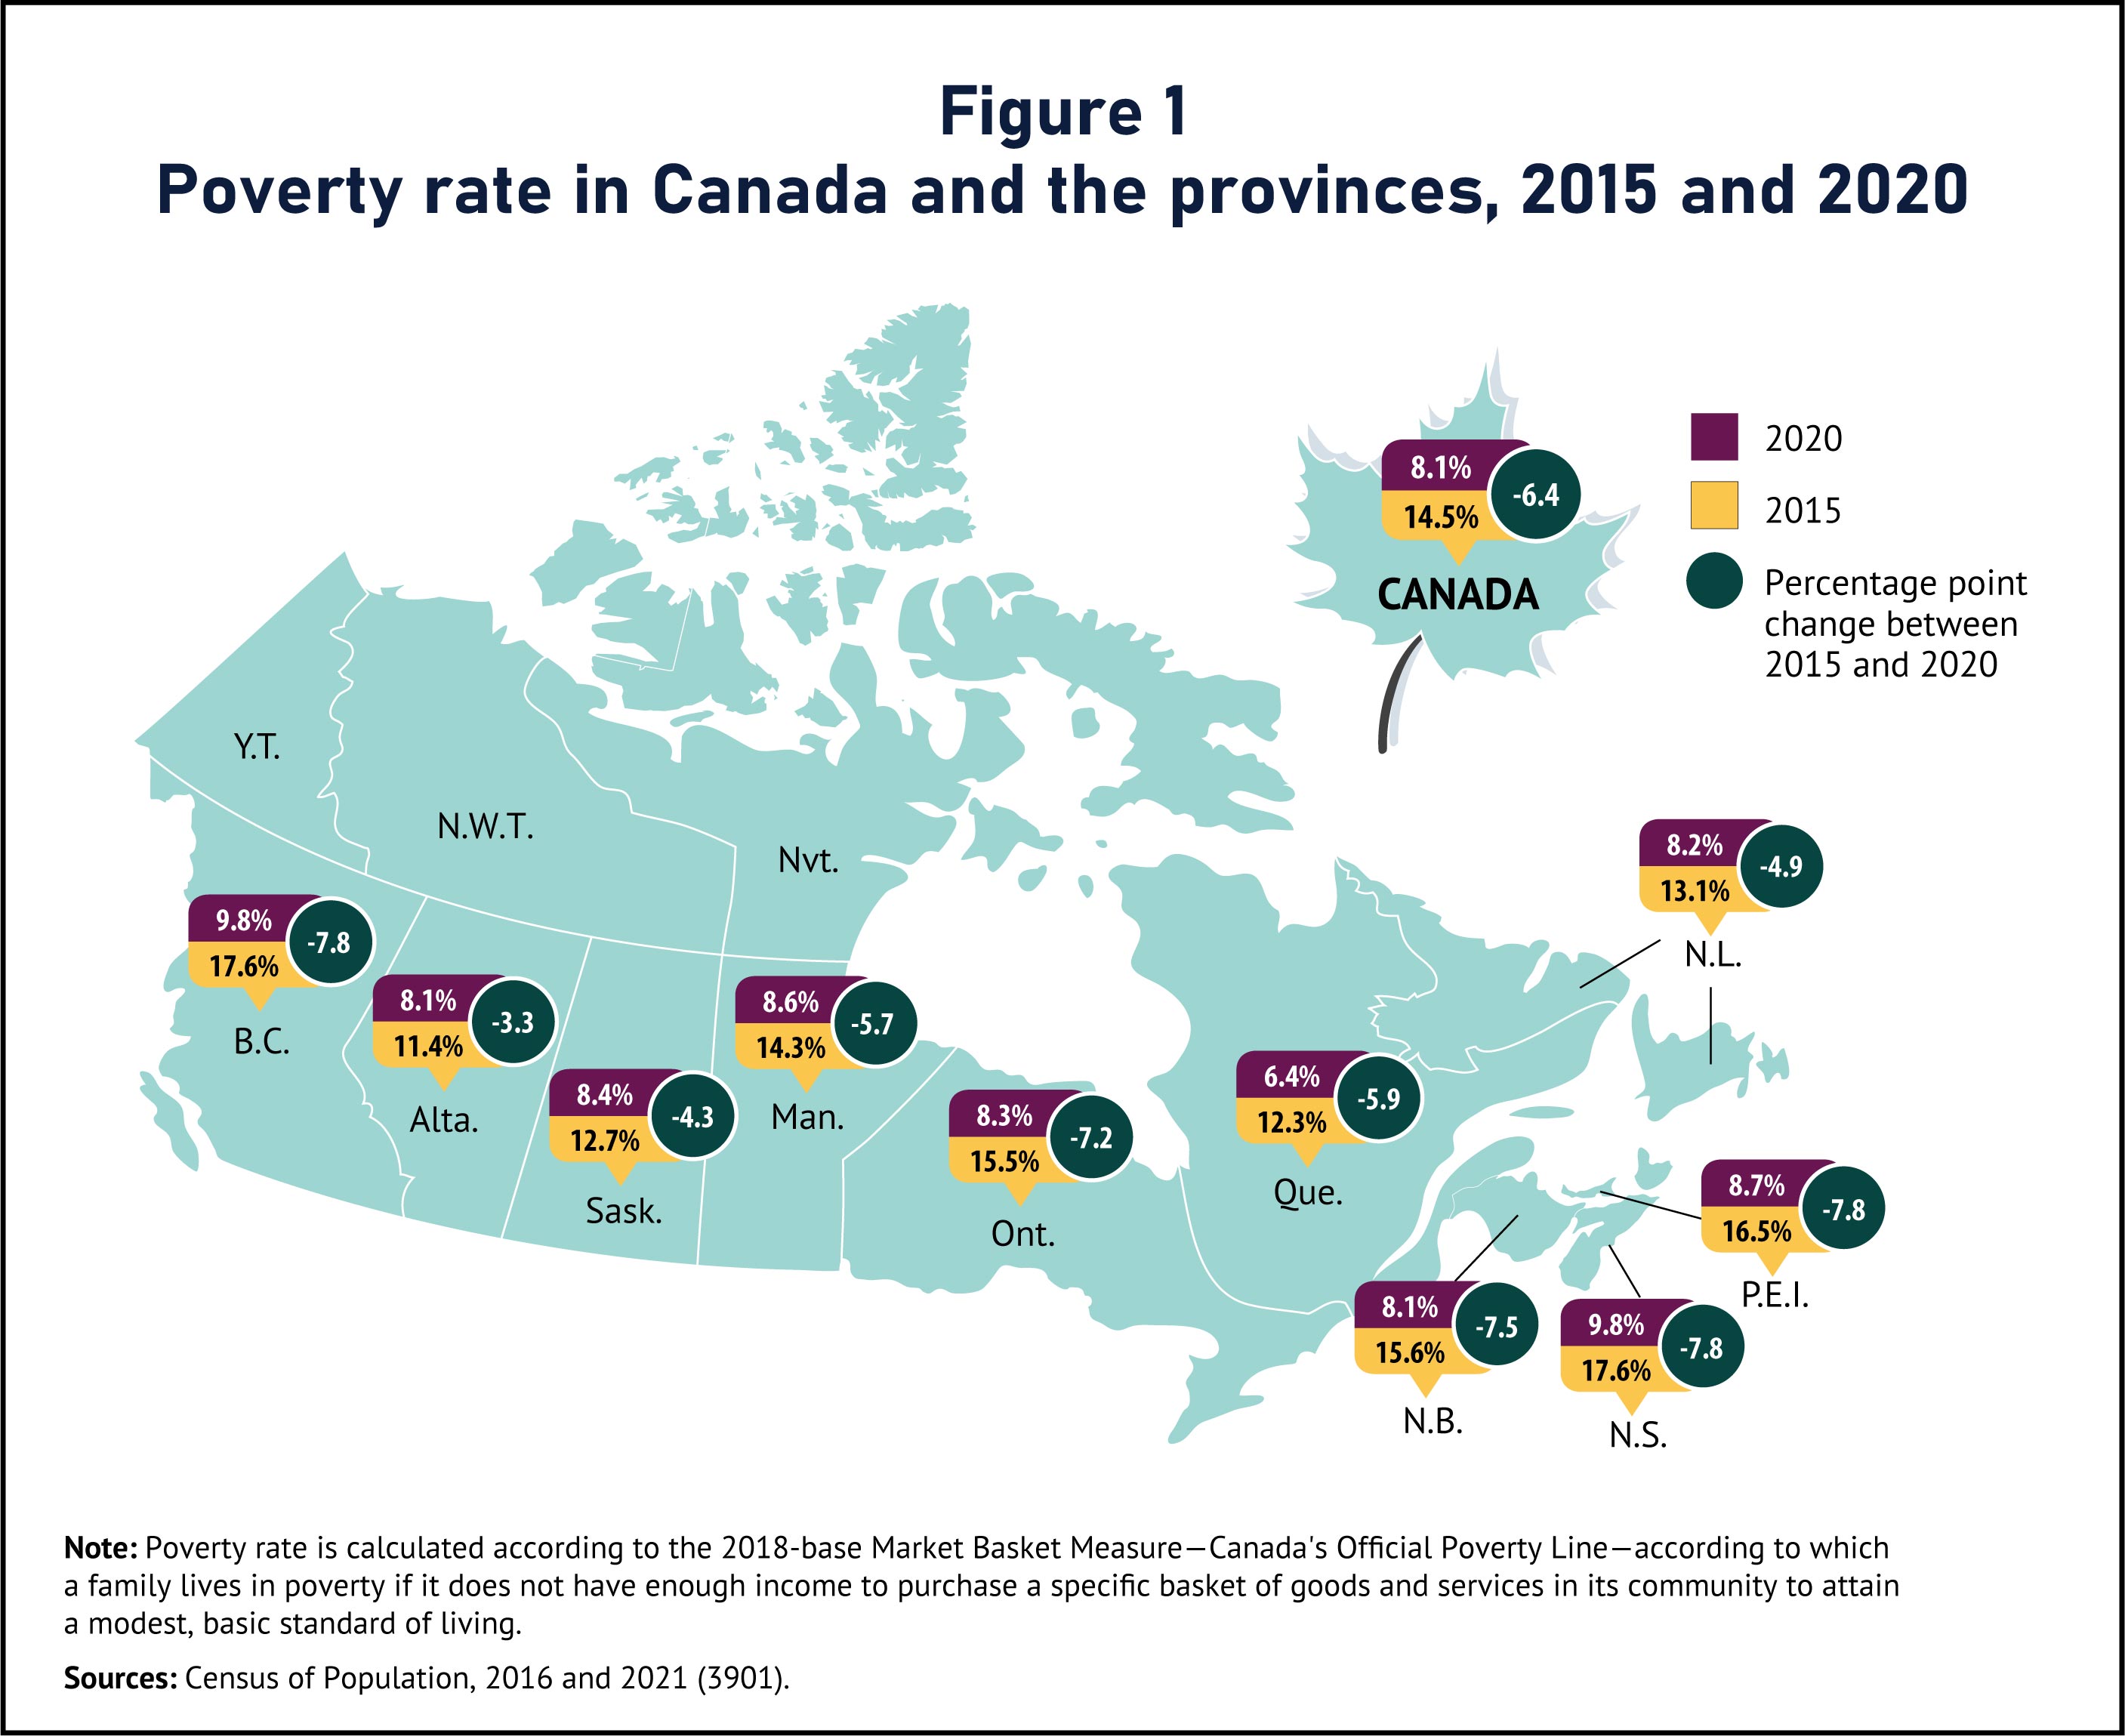 Figure 1. Poverty rate in Canada and the provinces, 2015 and 2020